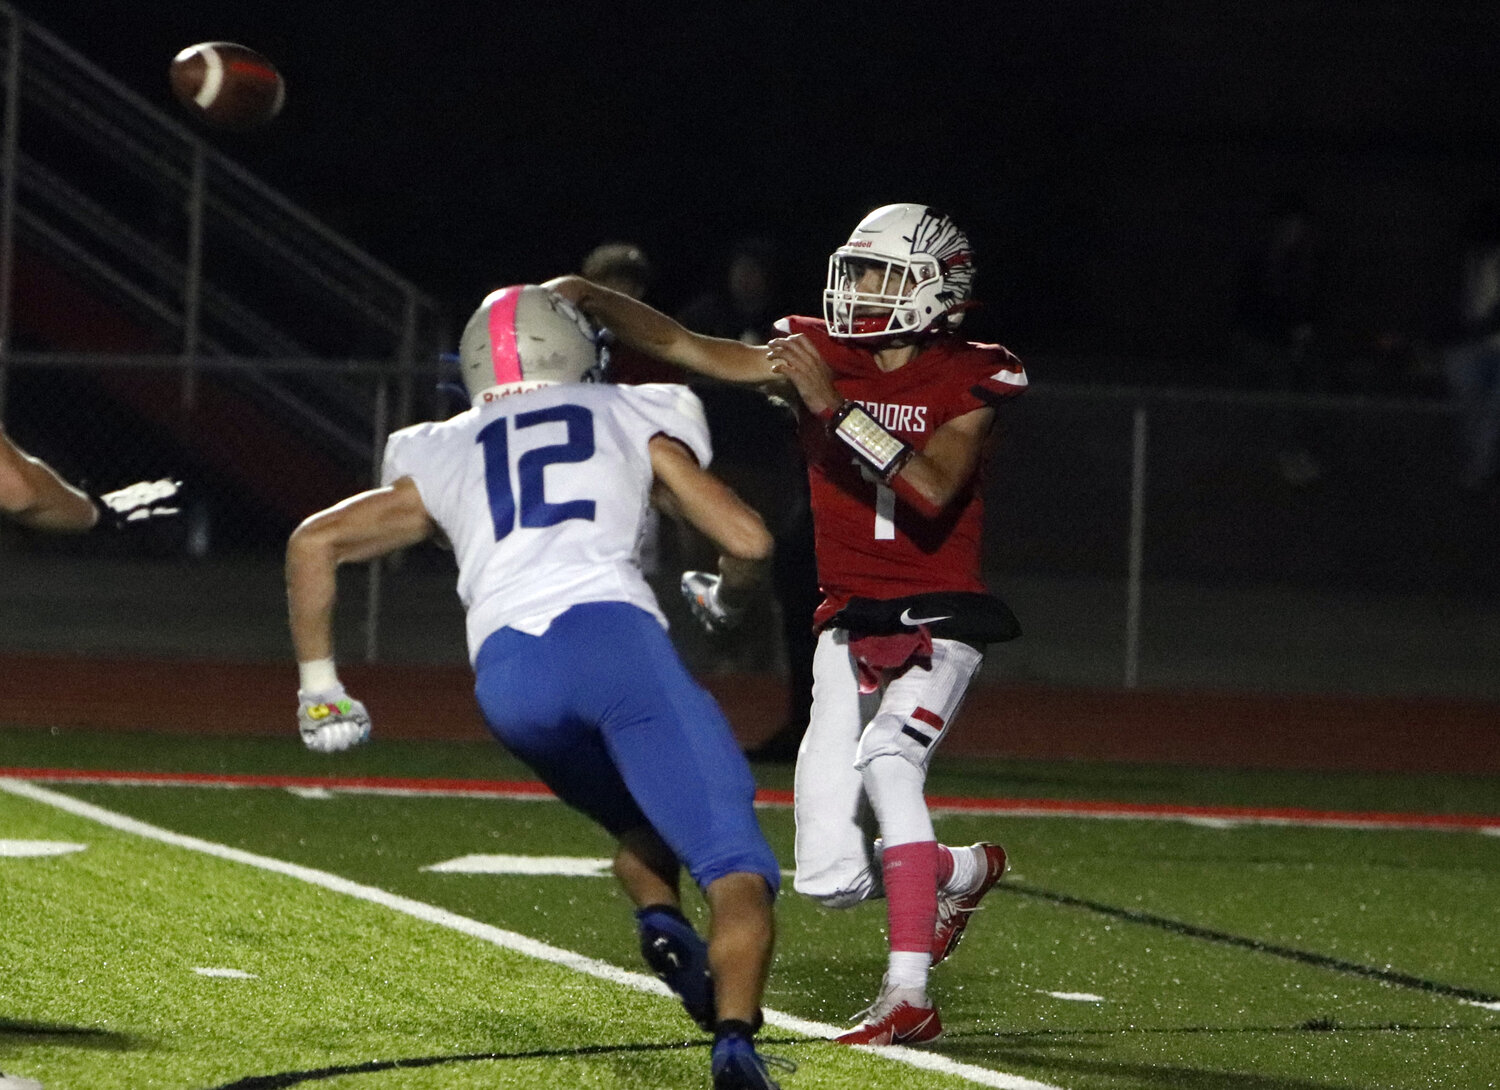 Warrenton quarterback Charlie Blondin throws a pass during the second half of Warrenton’s win over Lutheran St. Charles.